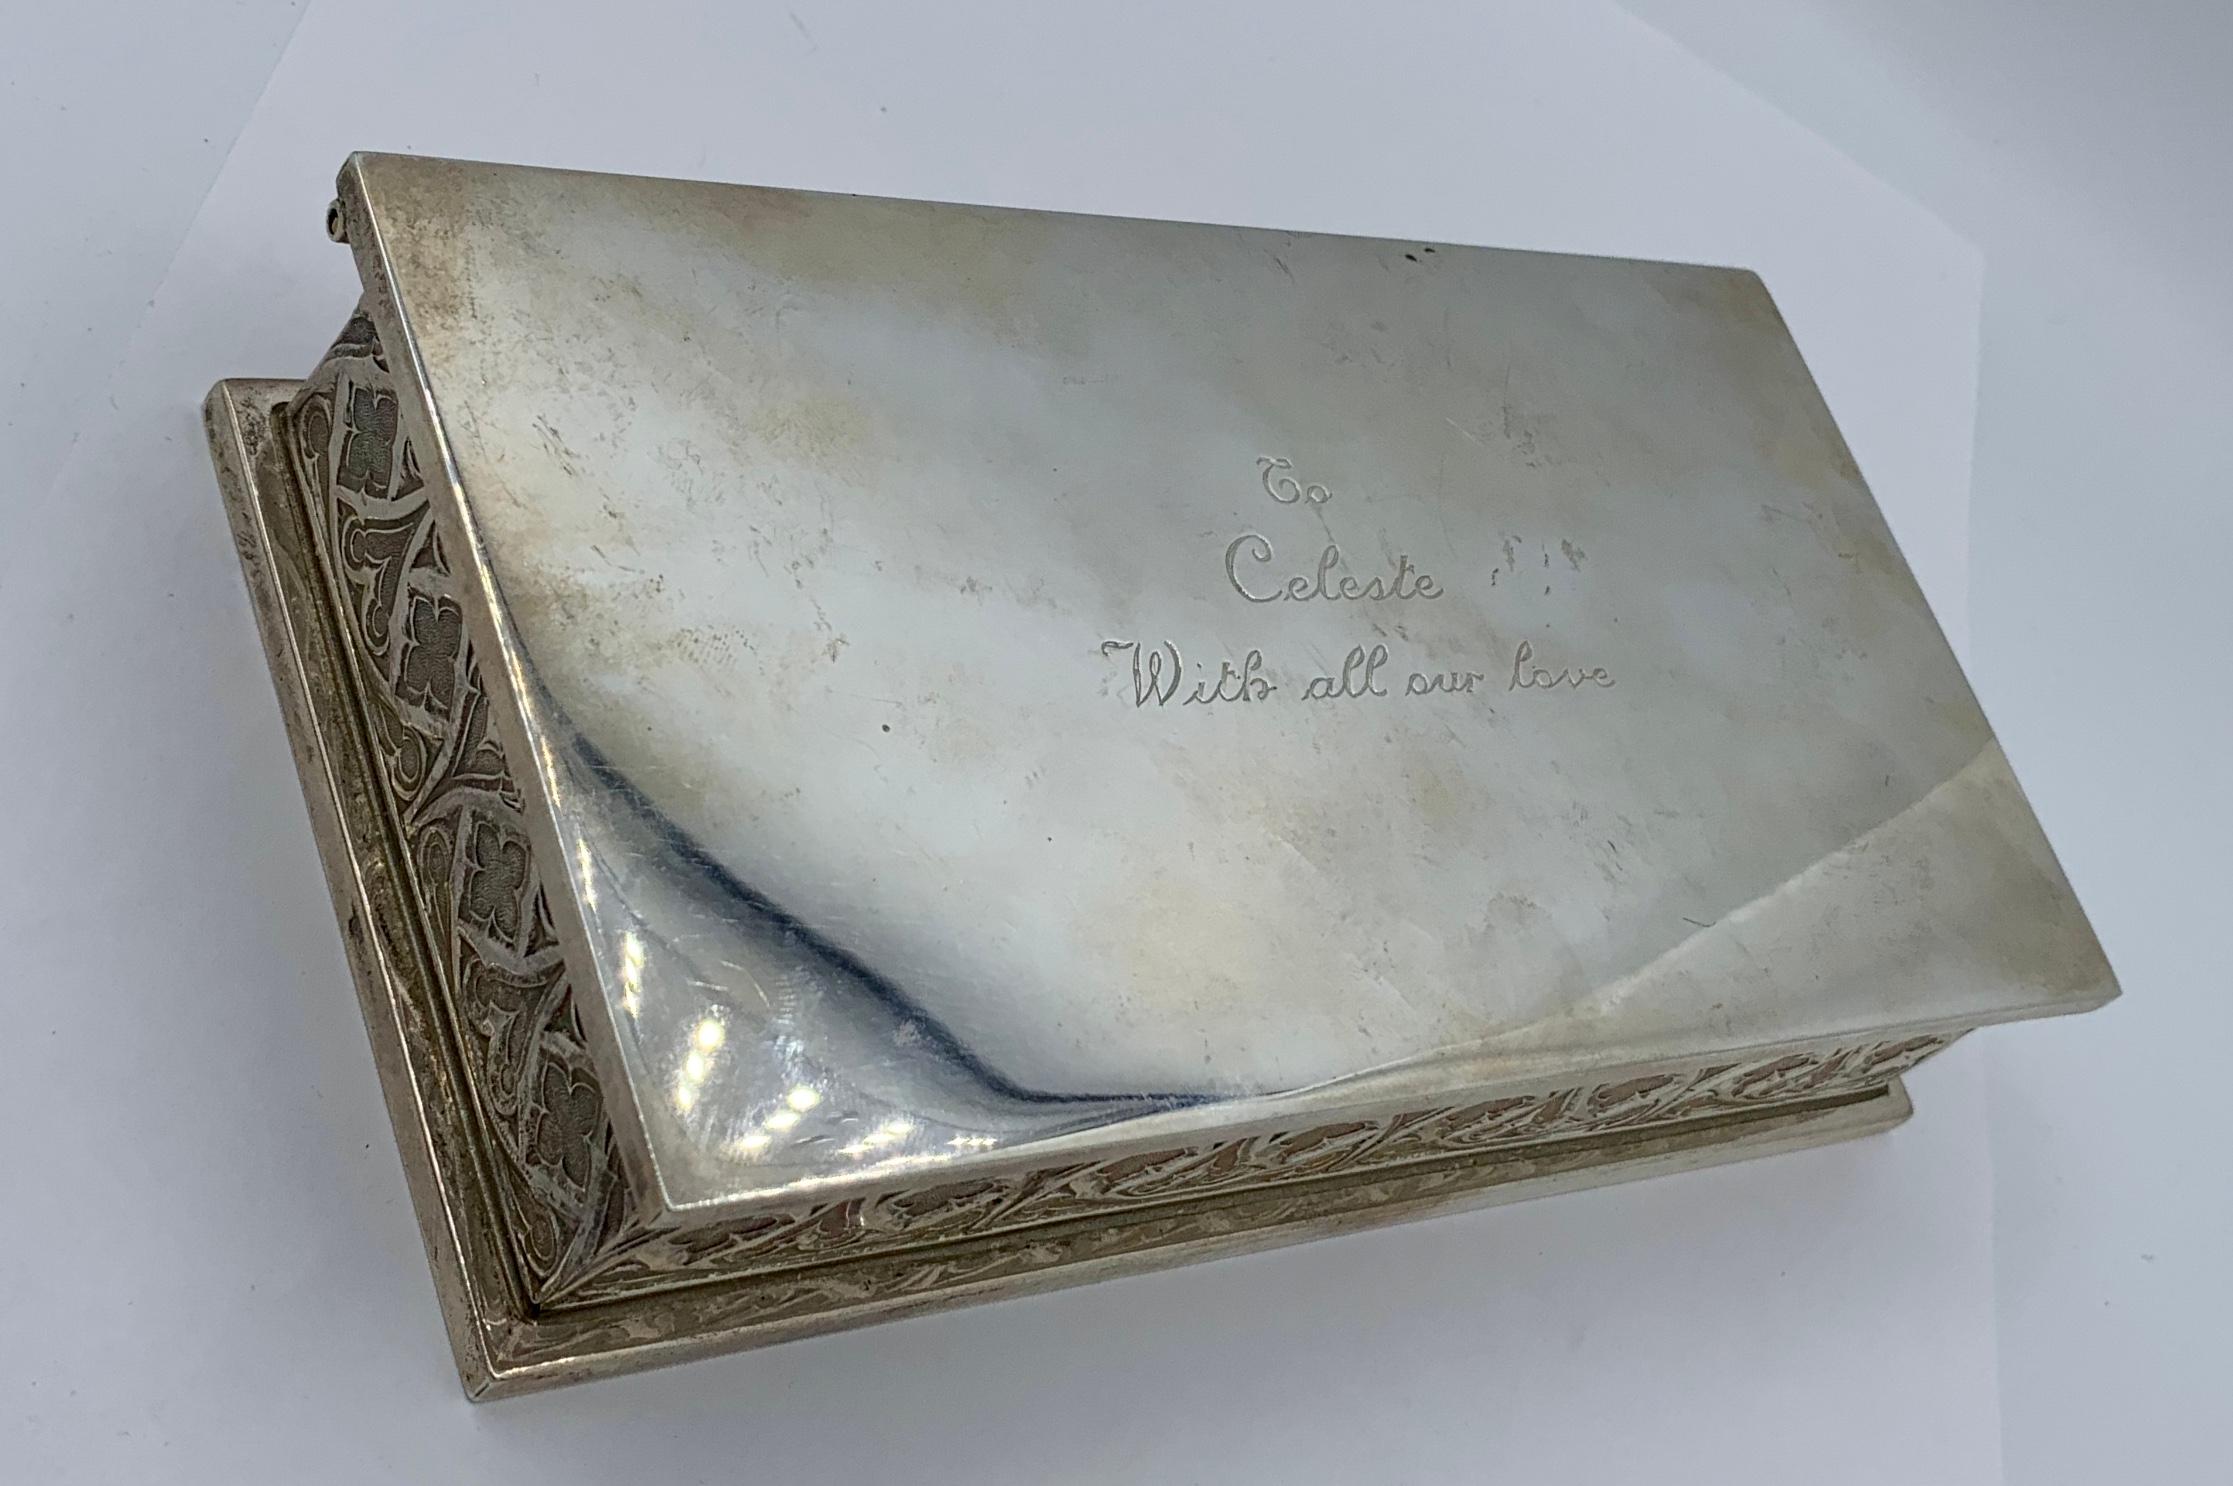 This is a Signed Tiffany Sterling Silver Jewelry Trinket Box Presented to actress Celeste Holm by the Cast of the Soap Opera 